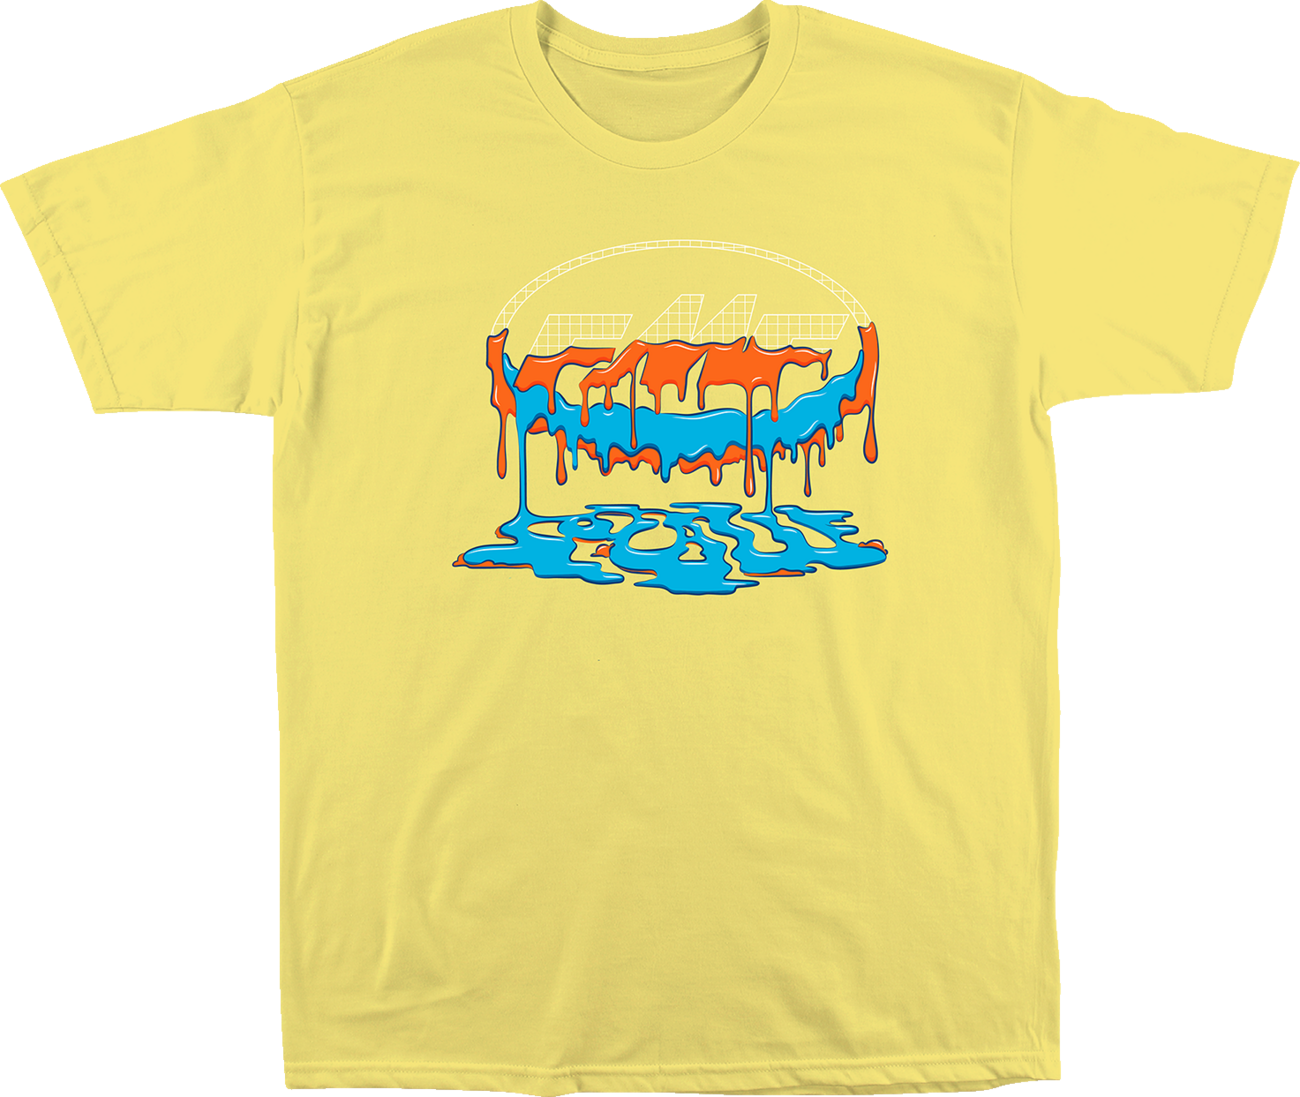 FMF Ooze T-Shirt - Yellow - Small SP22118902YLSM 3030-21856